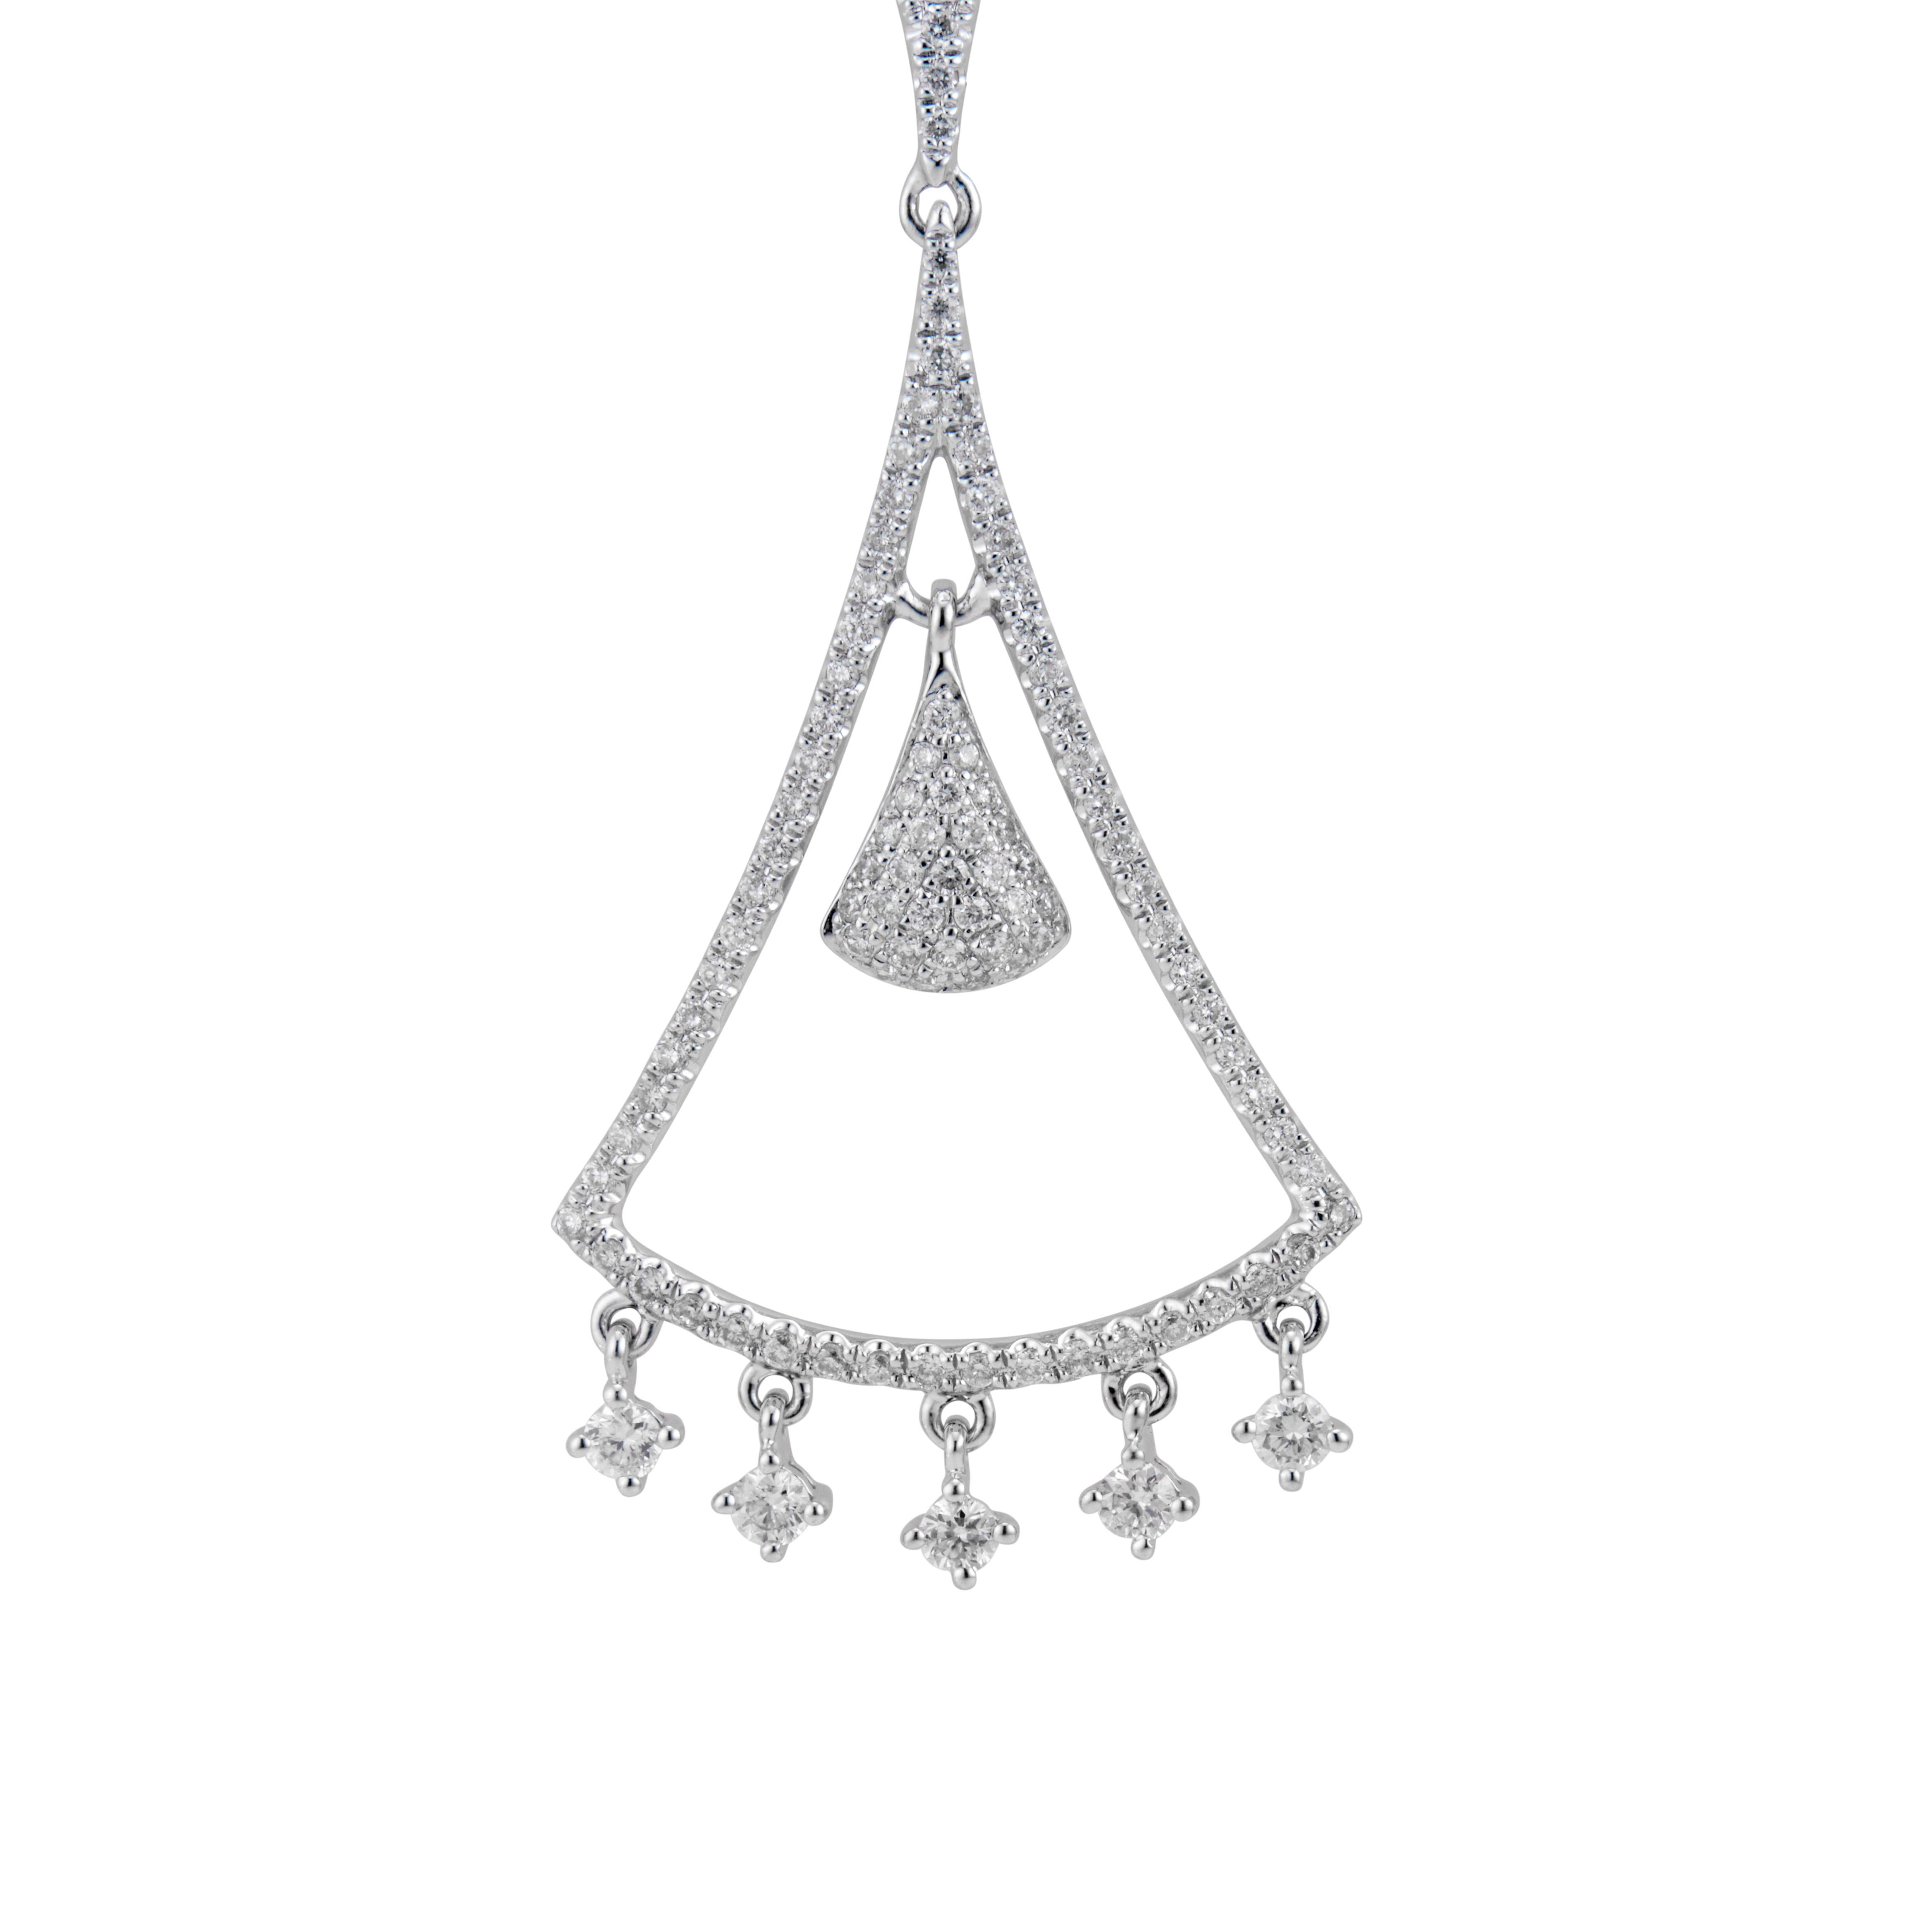 Round Cut GB 1.11 Carat Diamond White Gold Pave Dangle Chandelier Earrings For Sale